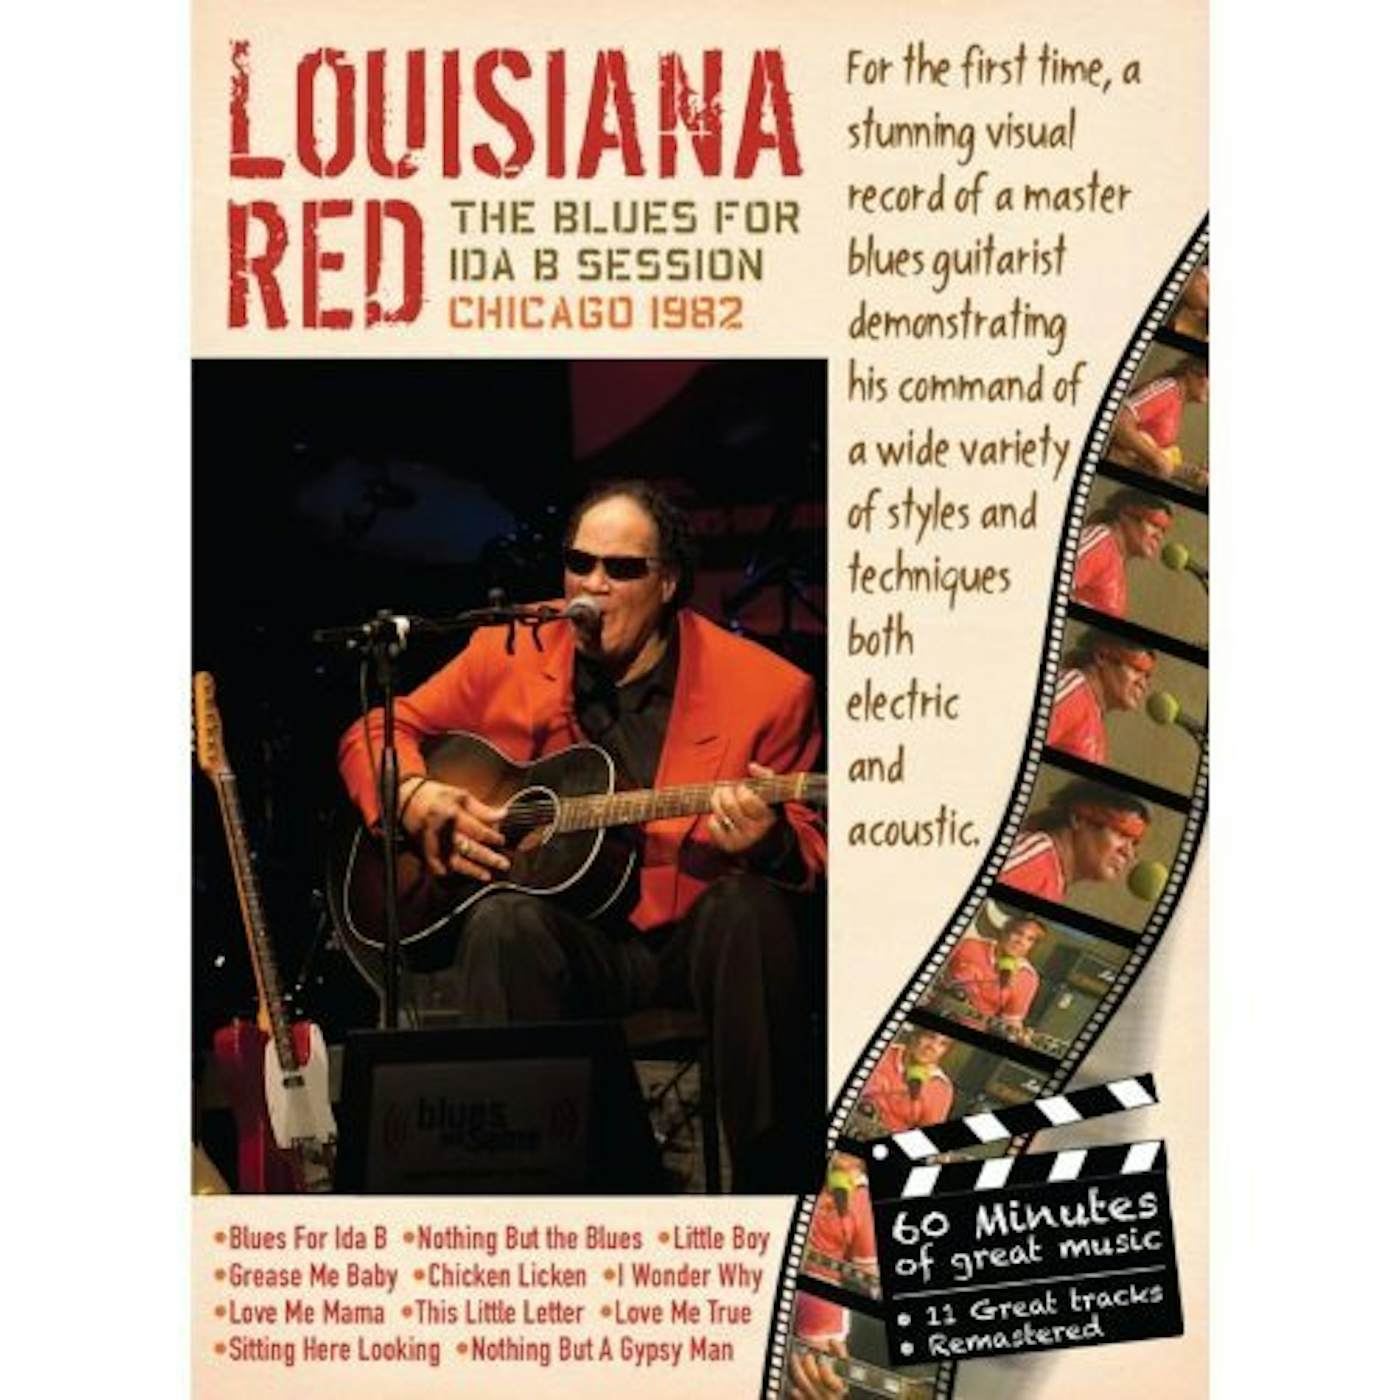 Louisiana Red BLUES FOR IDA B SESSION CHICAGO 1982 DVD